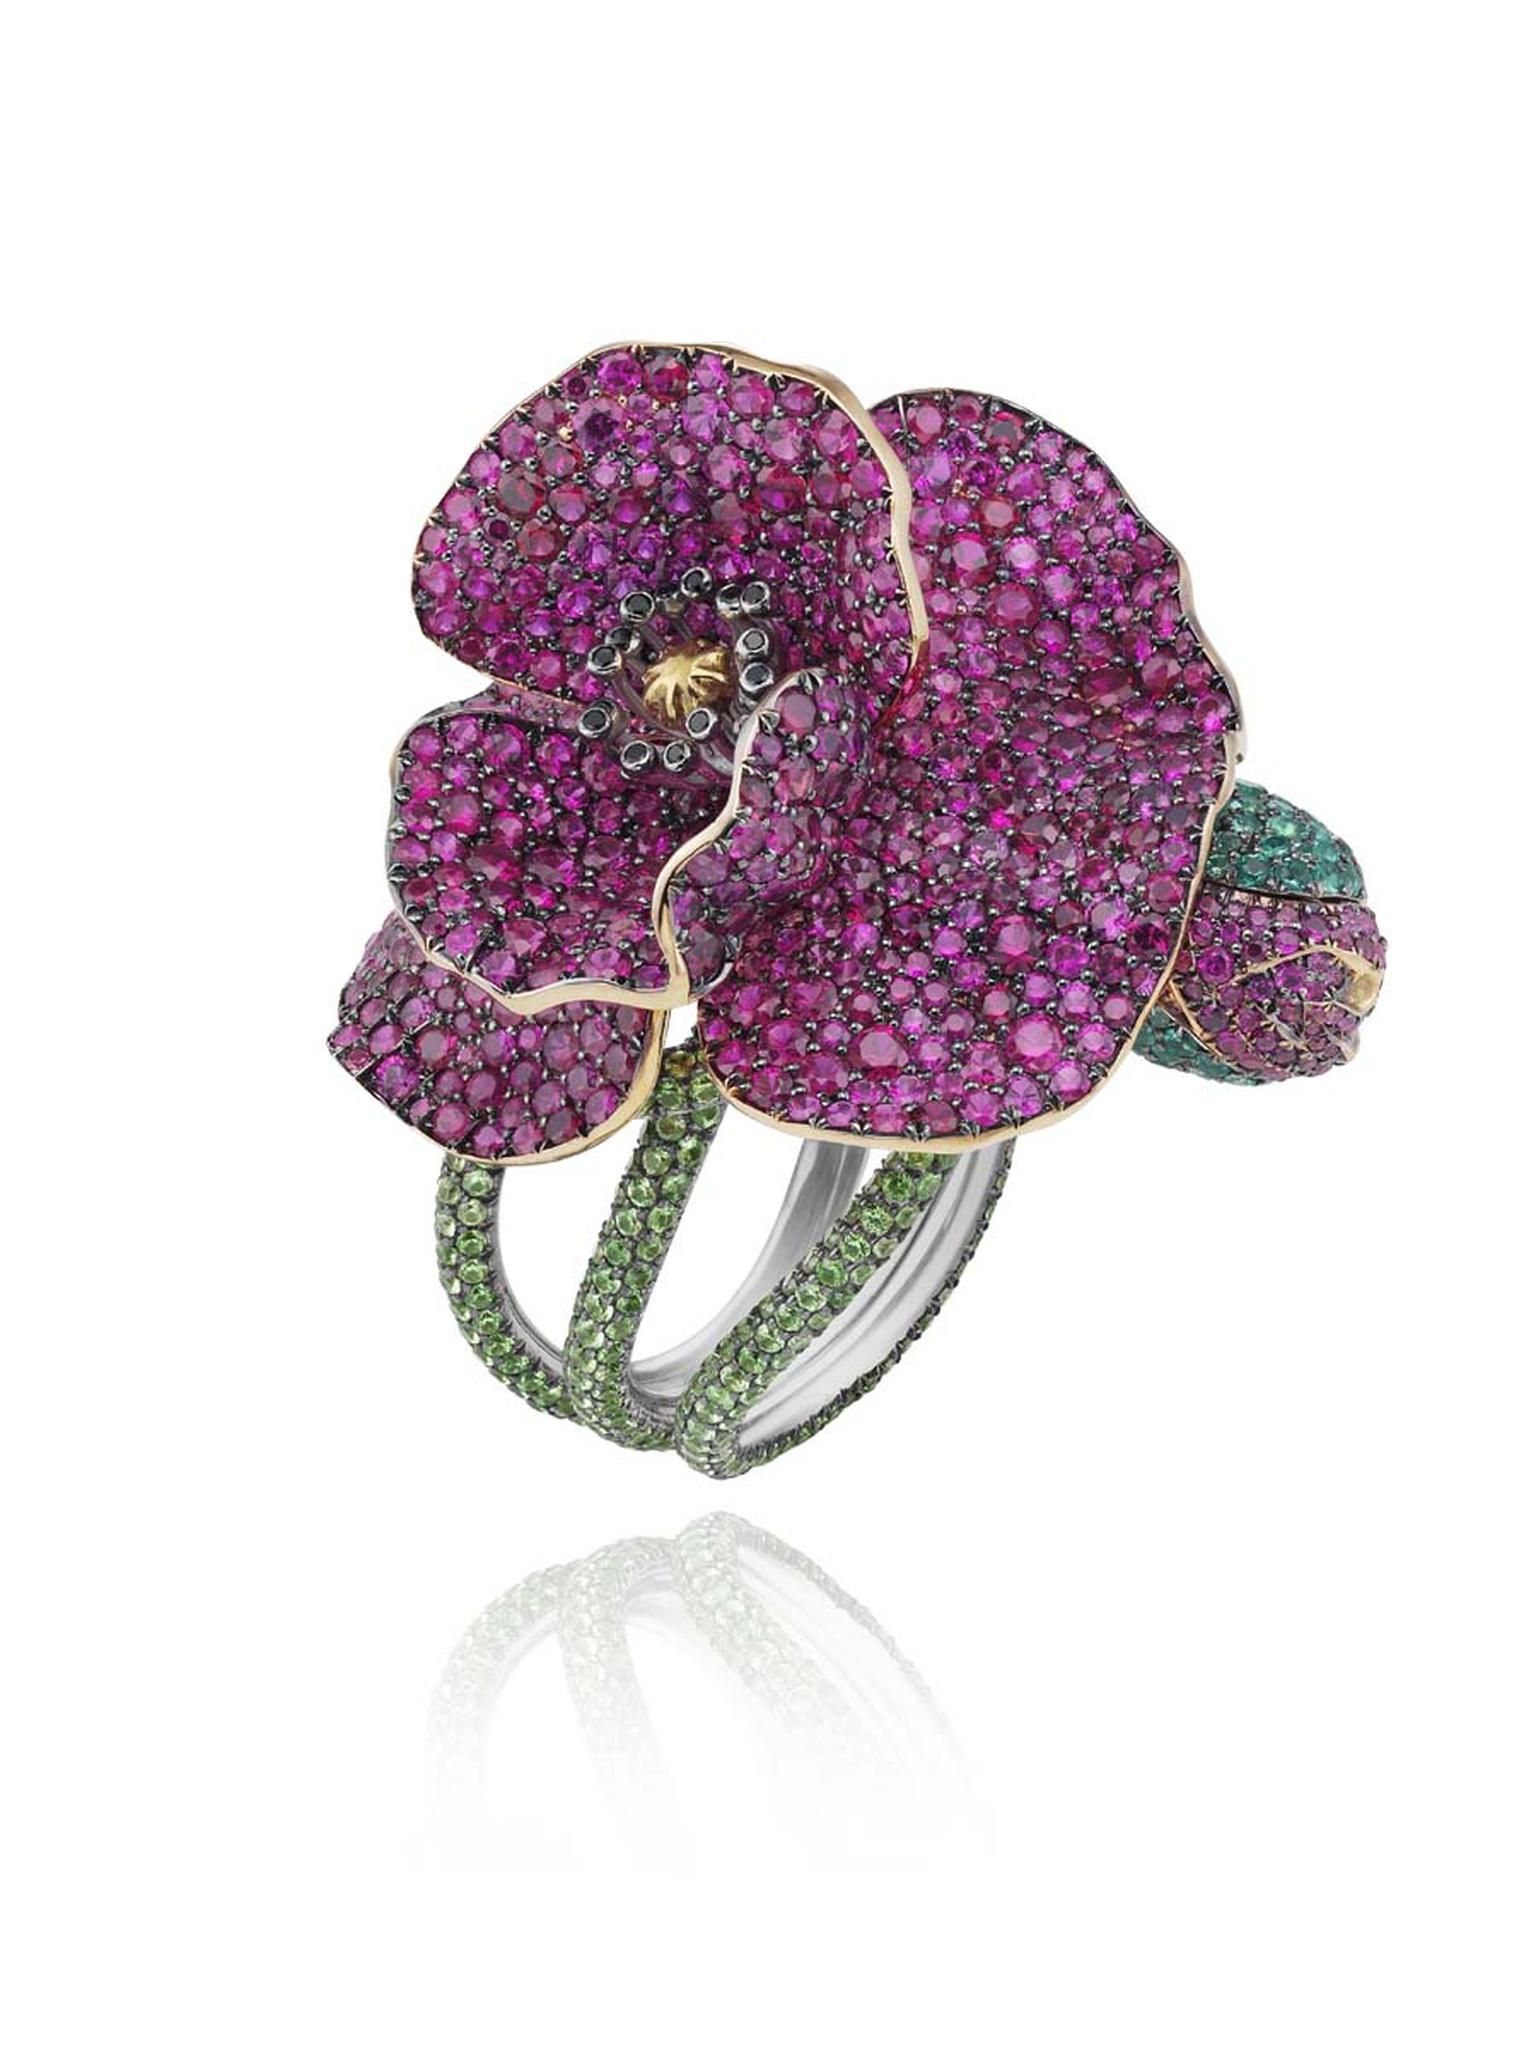 829236-9001 Poppy Ring  from the Red Carpet Collection 2013 whiteChopard.jpg